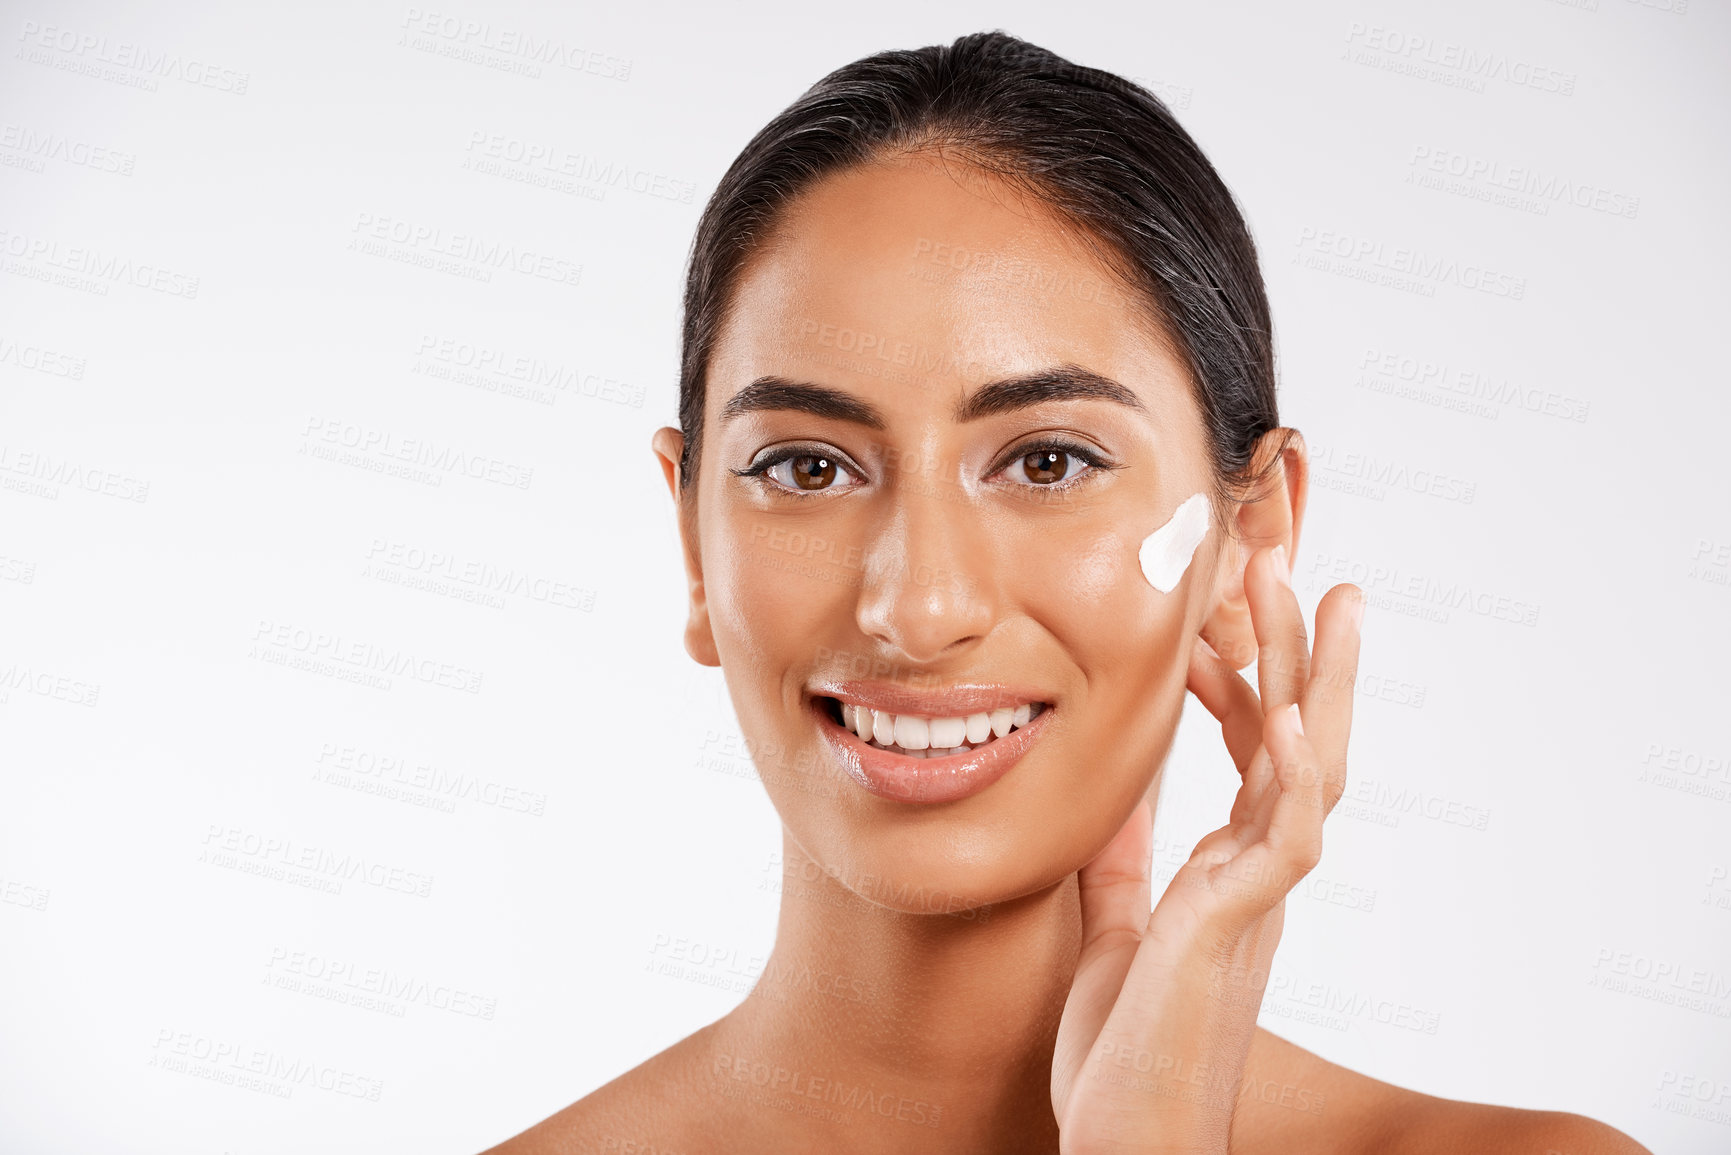 Buy stock photo Studio portrait of a beautiful young woman applying lotion while posing against a gray background